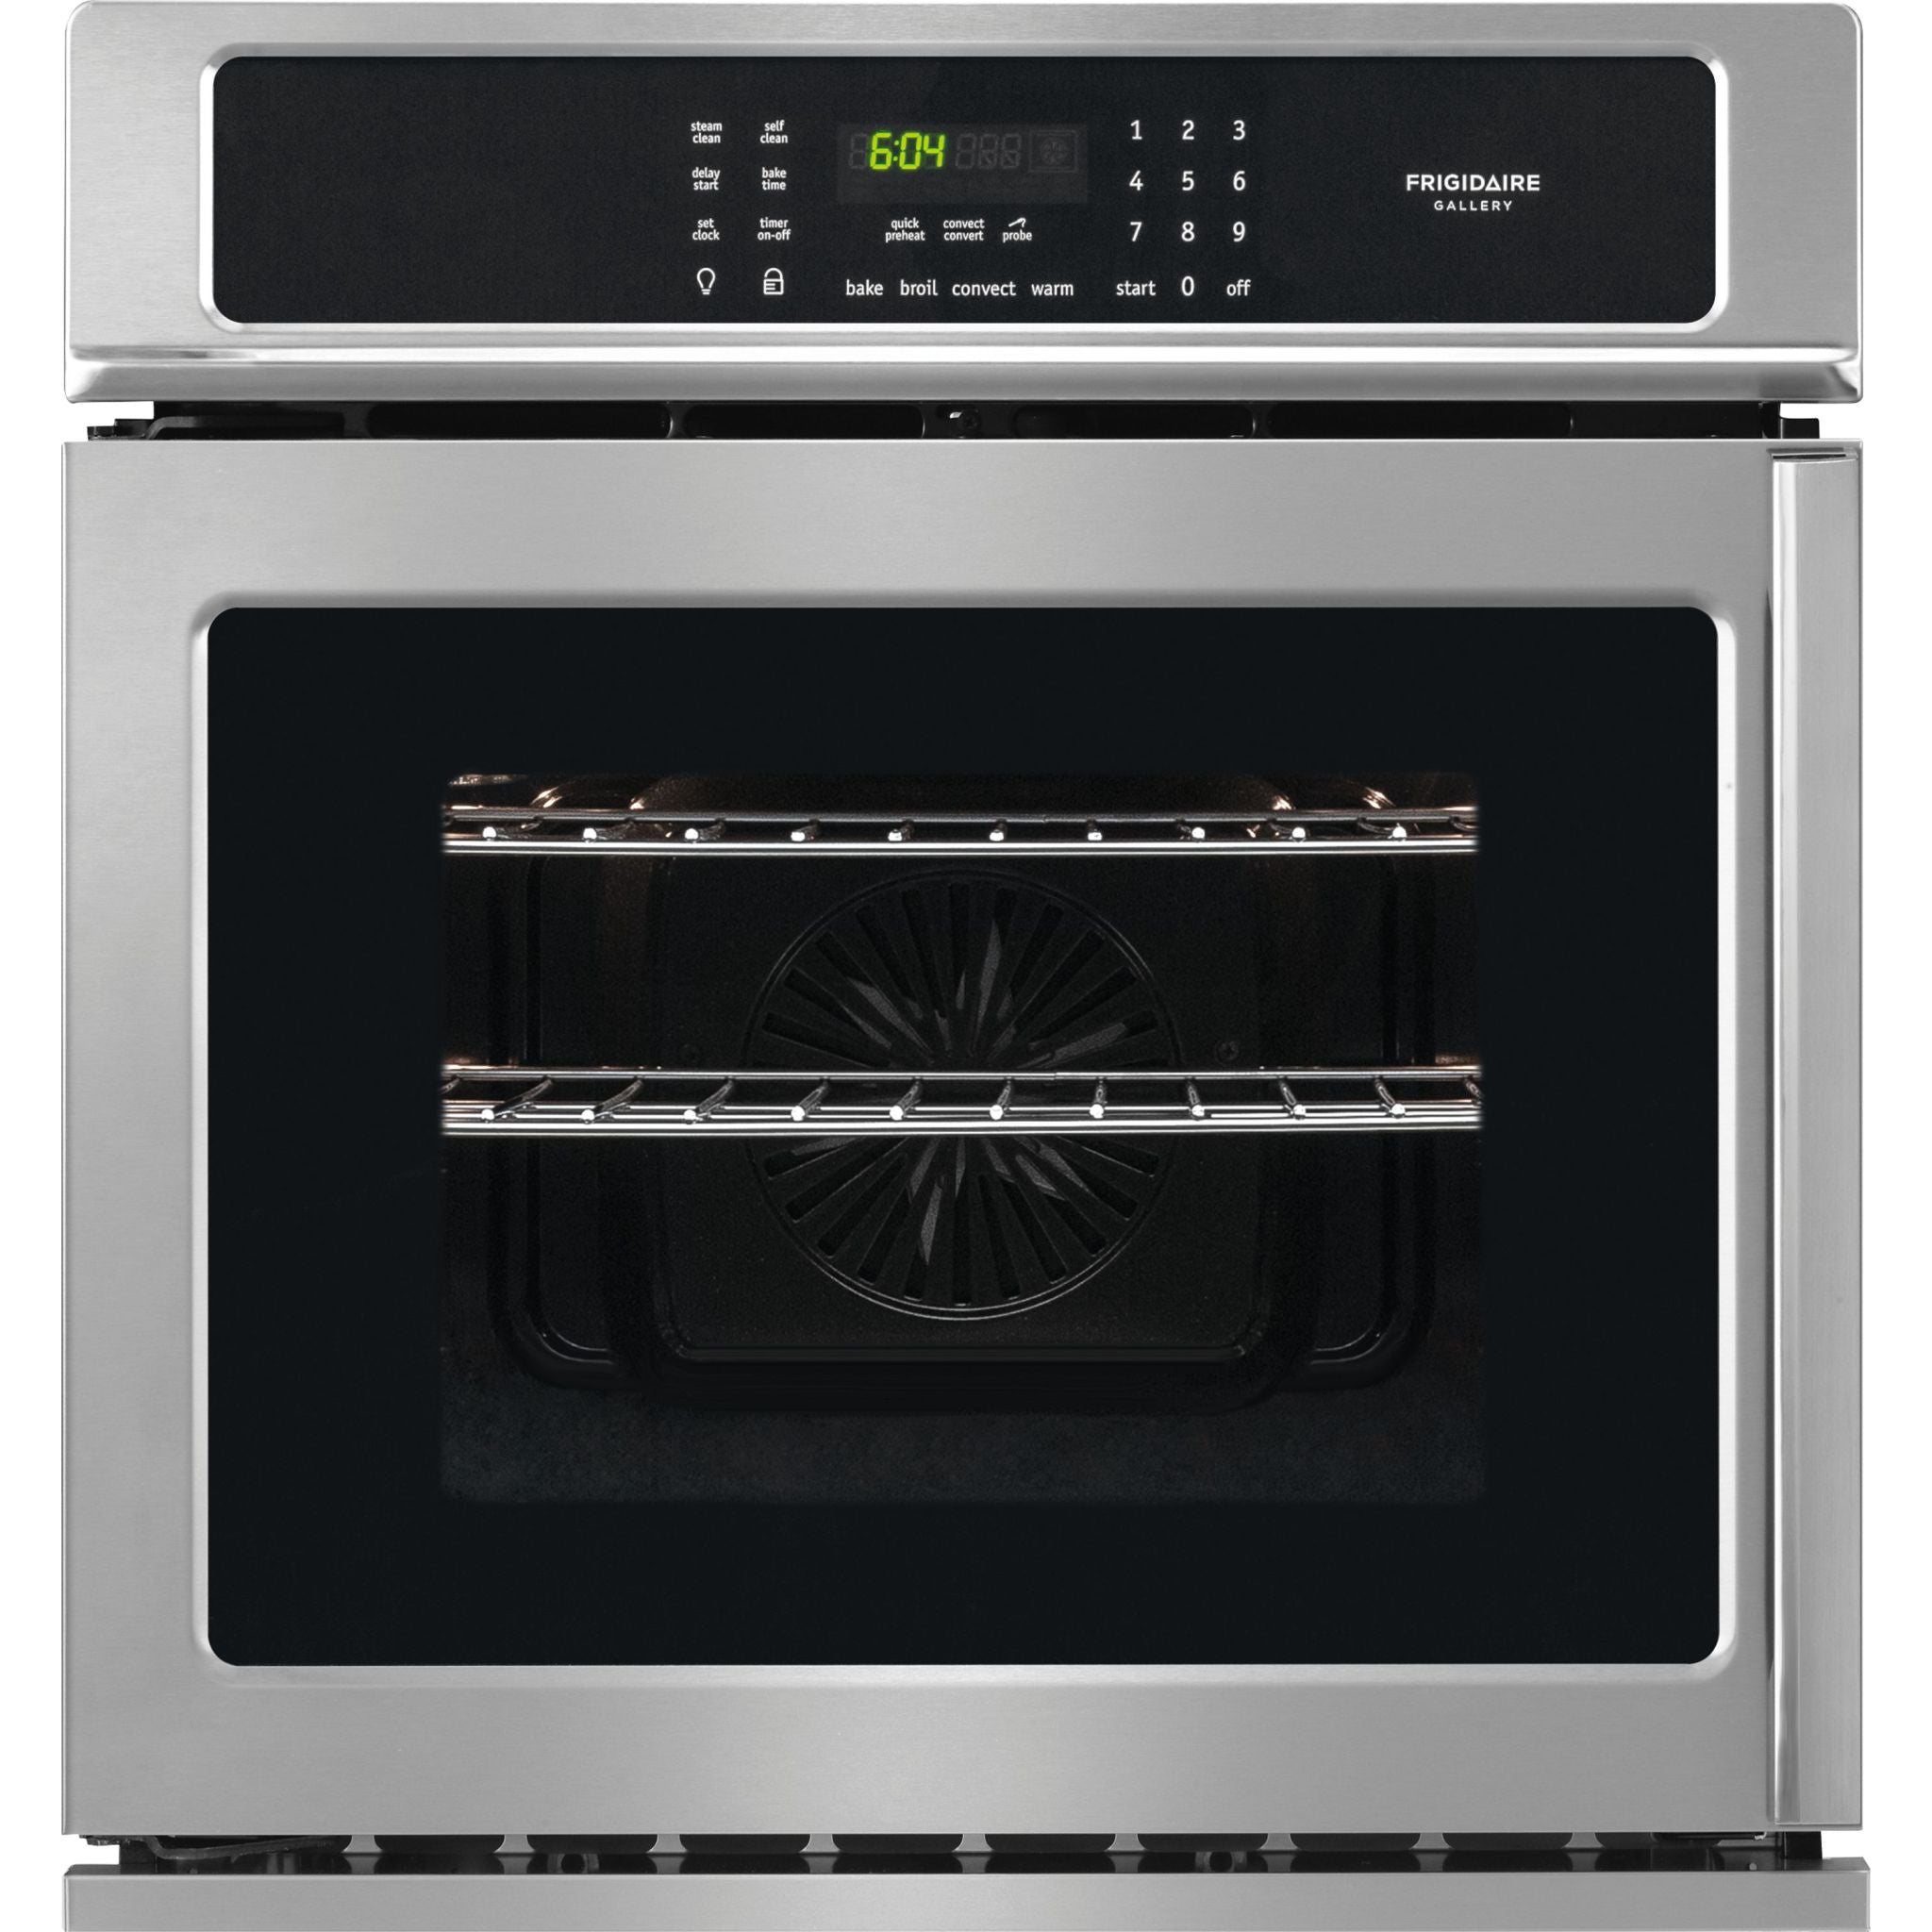 Frigidaire Gallery, Frigidaire Gallery 27" Easy Clean Wall Oven (FGEW276SPF) - Stainless Steel